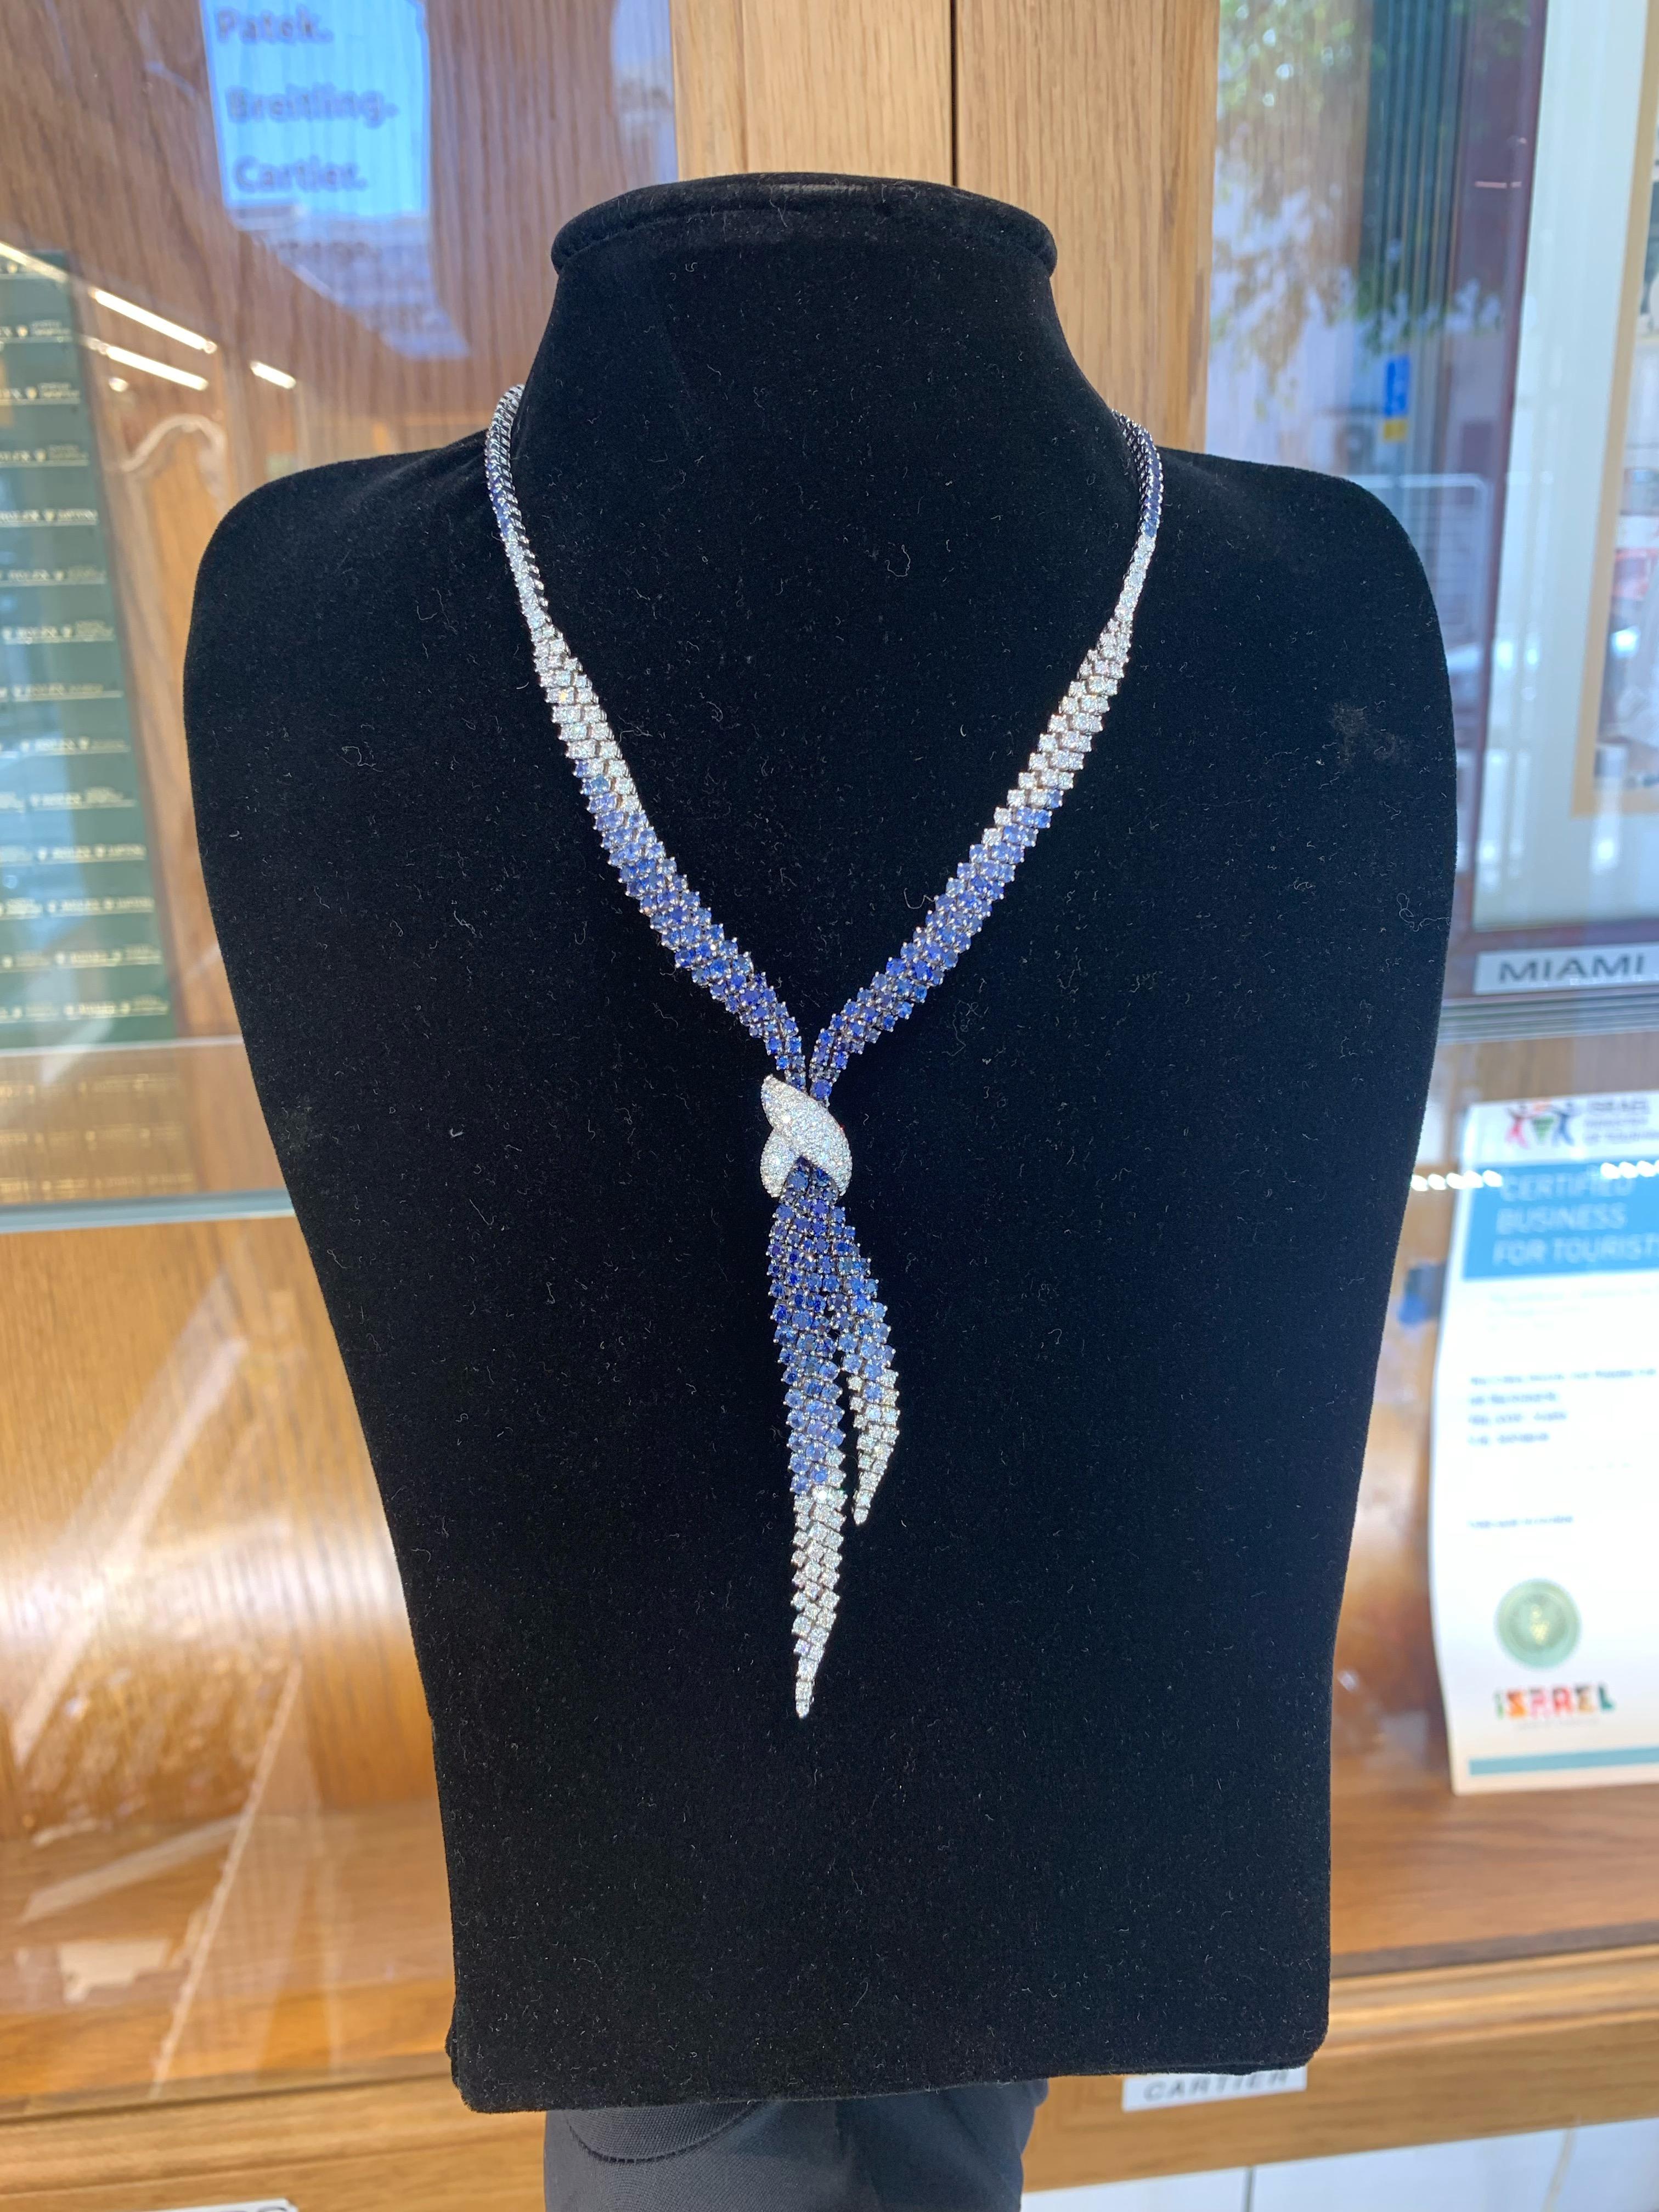 Beautiful Blue Sapphire & Diamond Necklace Made By “Stefan Hafner”.
Amazing Shine, Incredible Craftsmanship.
Great Statement Piece.
Very Well Crafted.
Approximately 18.0 Carats Blue Sapphires.
Approximately 1.75 Carats Of Diamonds.
Nice & Clean